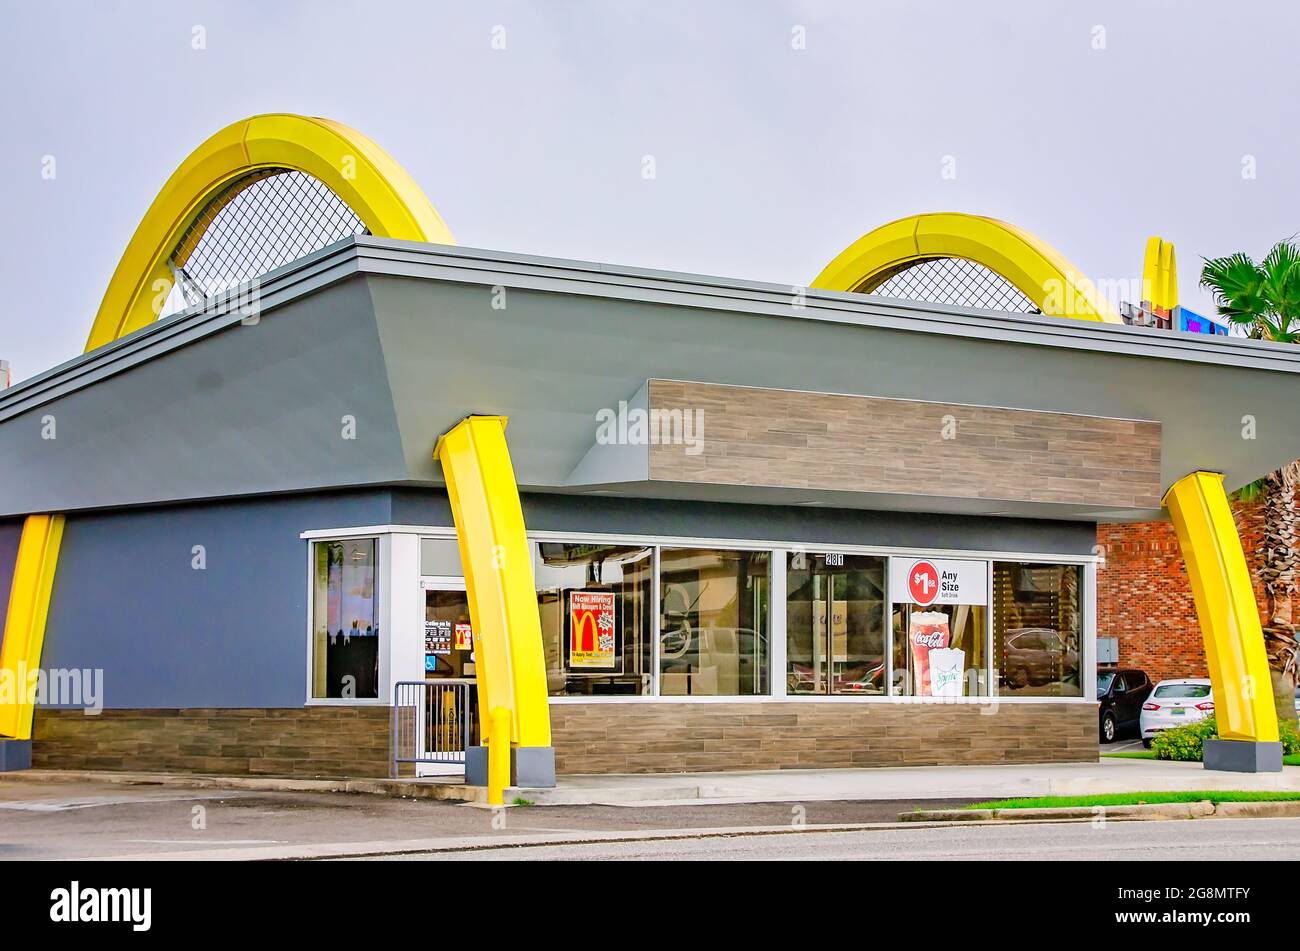 A McDonald’s restaurant features the Golden Arches in the building design, July 18, 2021, in Mobile, Alabama. Stock Photo